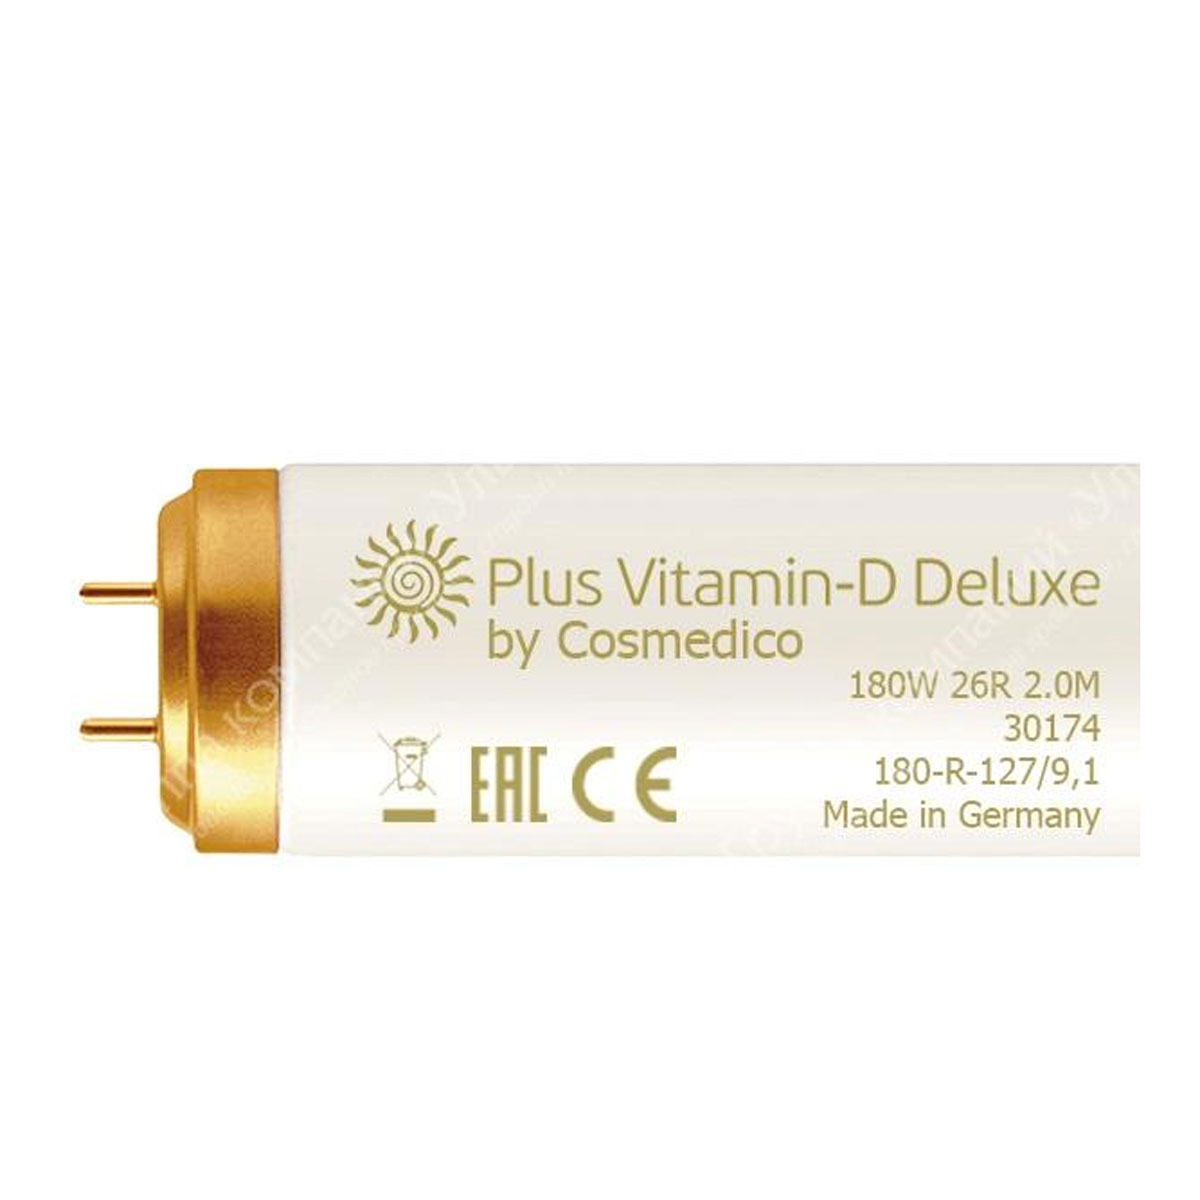 Plus Vitamin-D Deluxe 36R 180W by Cosmedico